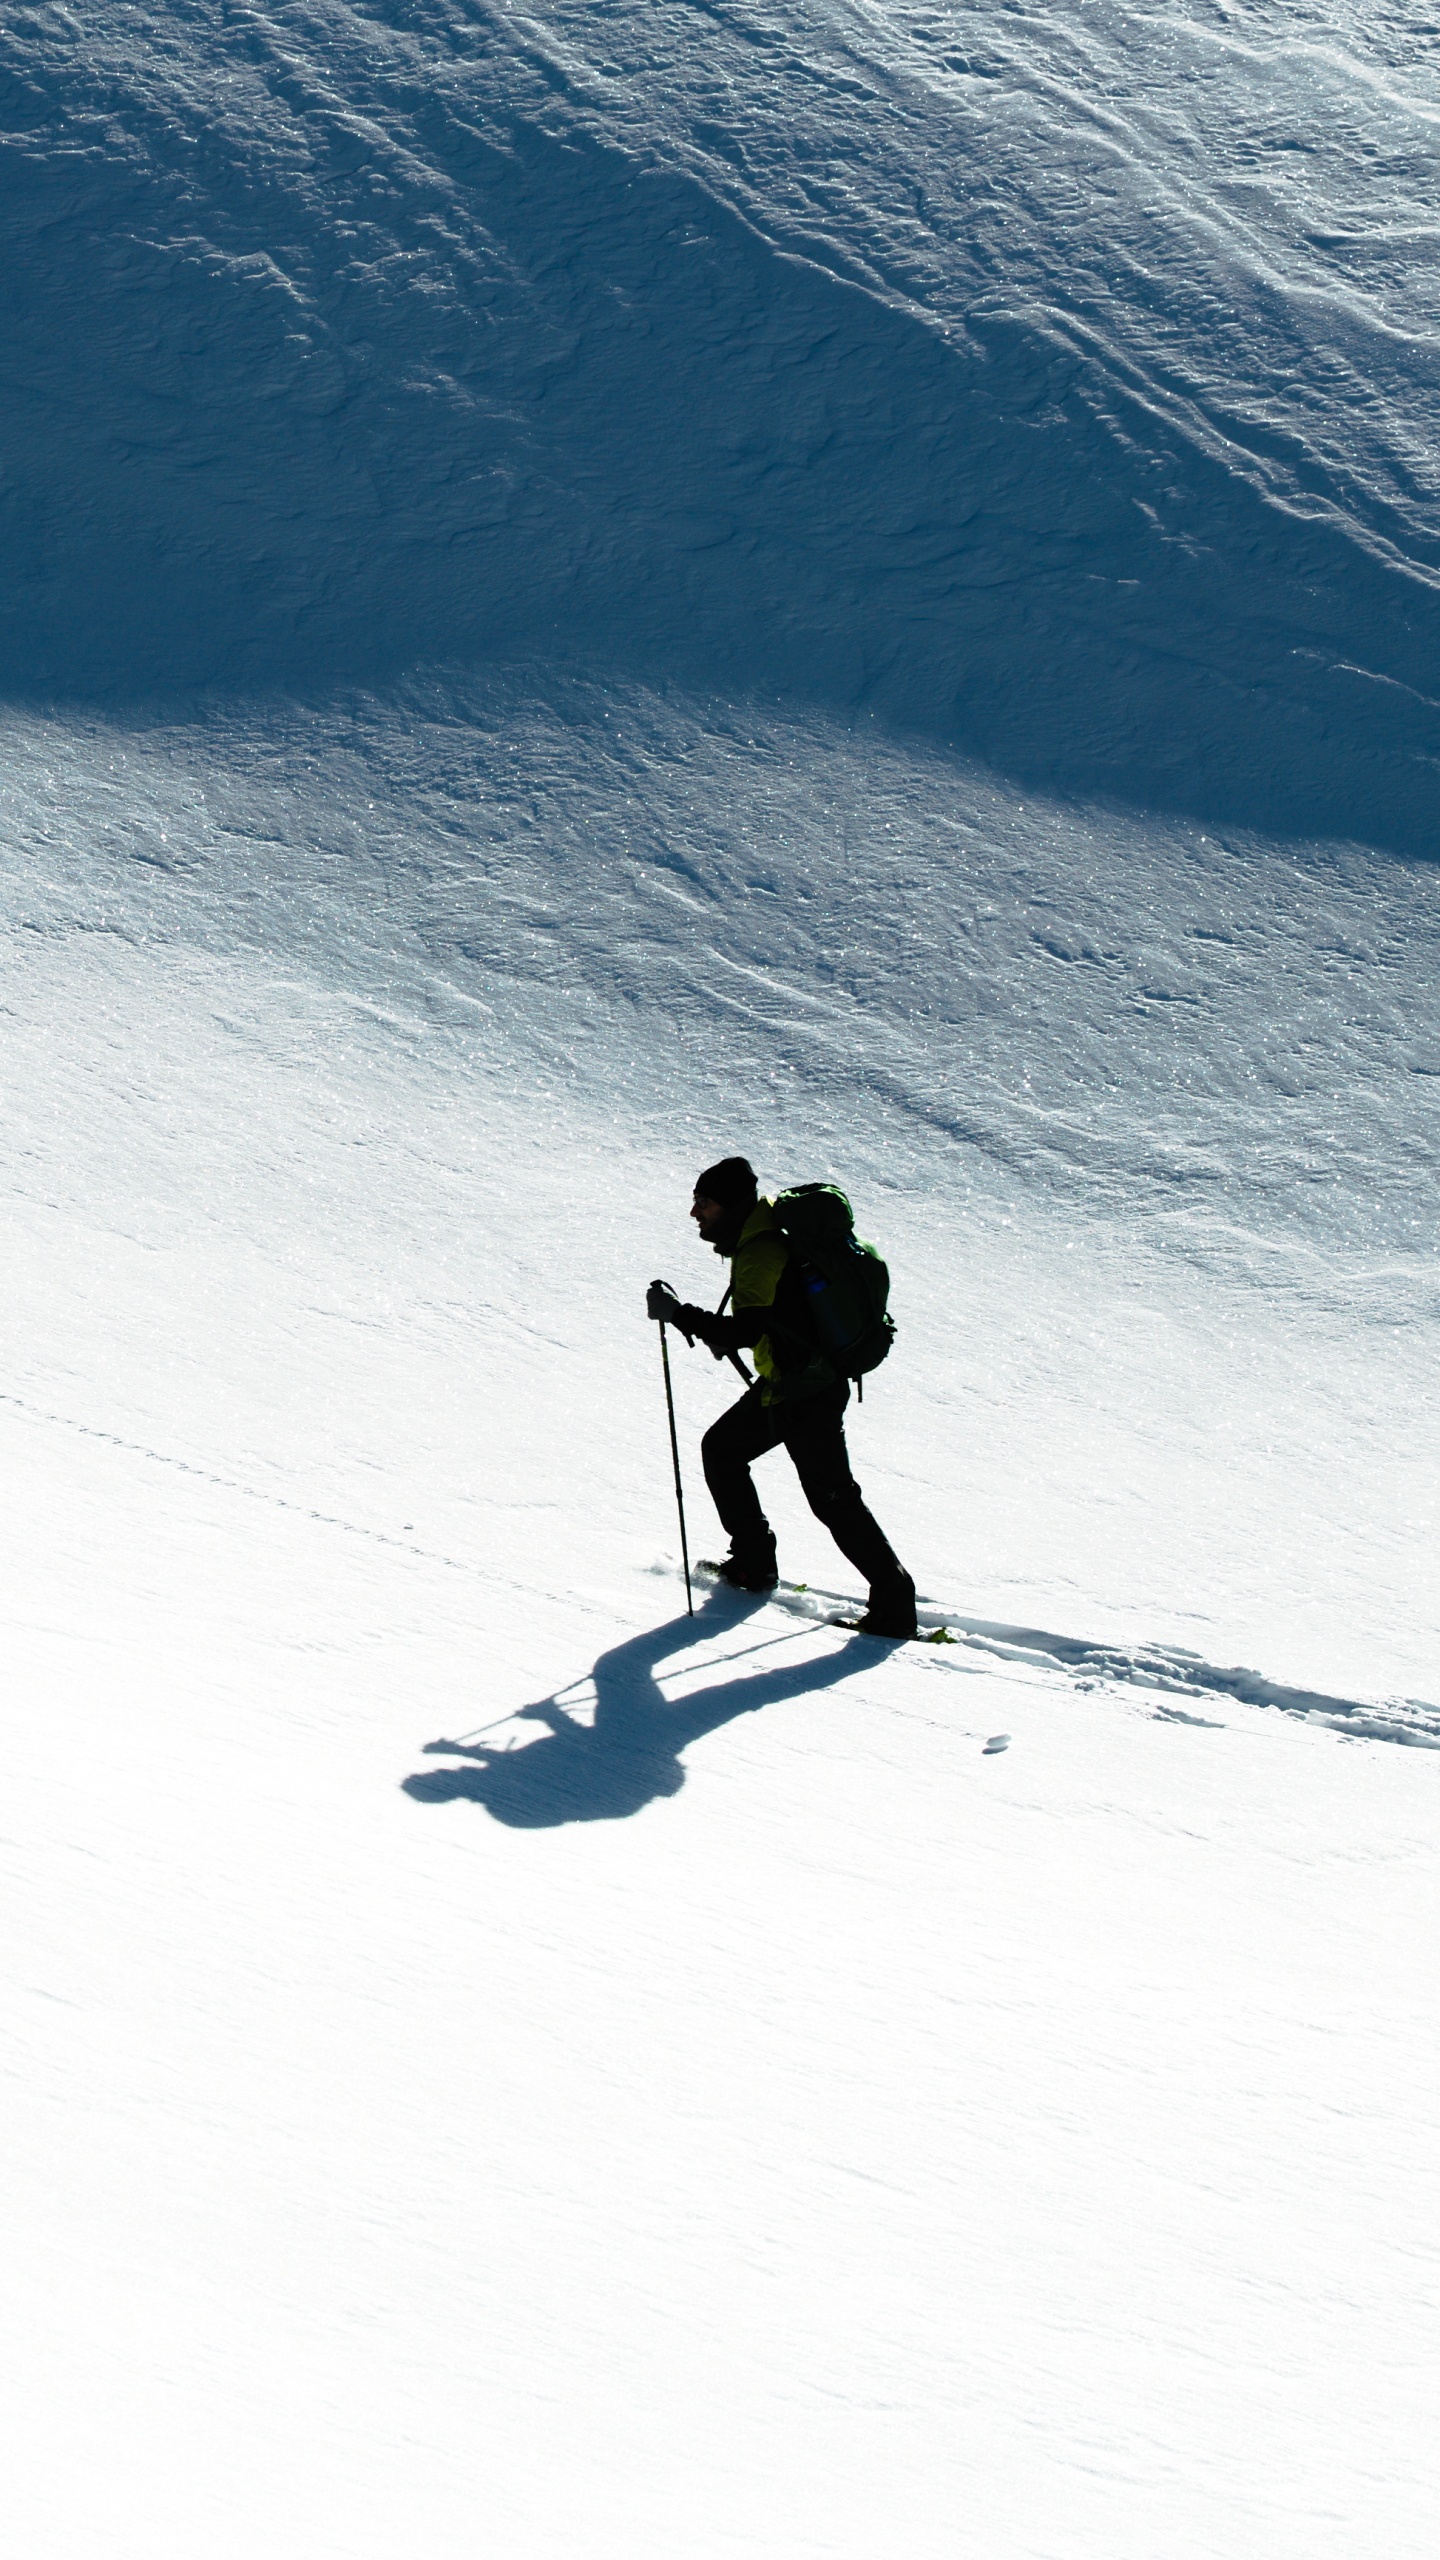 Man in Black Jacket and Pants Riding on Snowboard During Daytime. Wallpaper in 1440x2560 Resolution